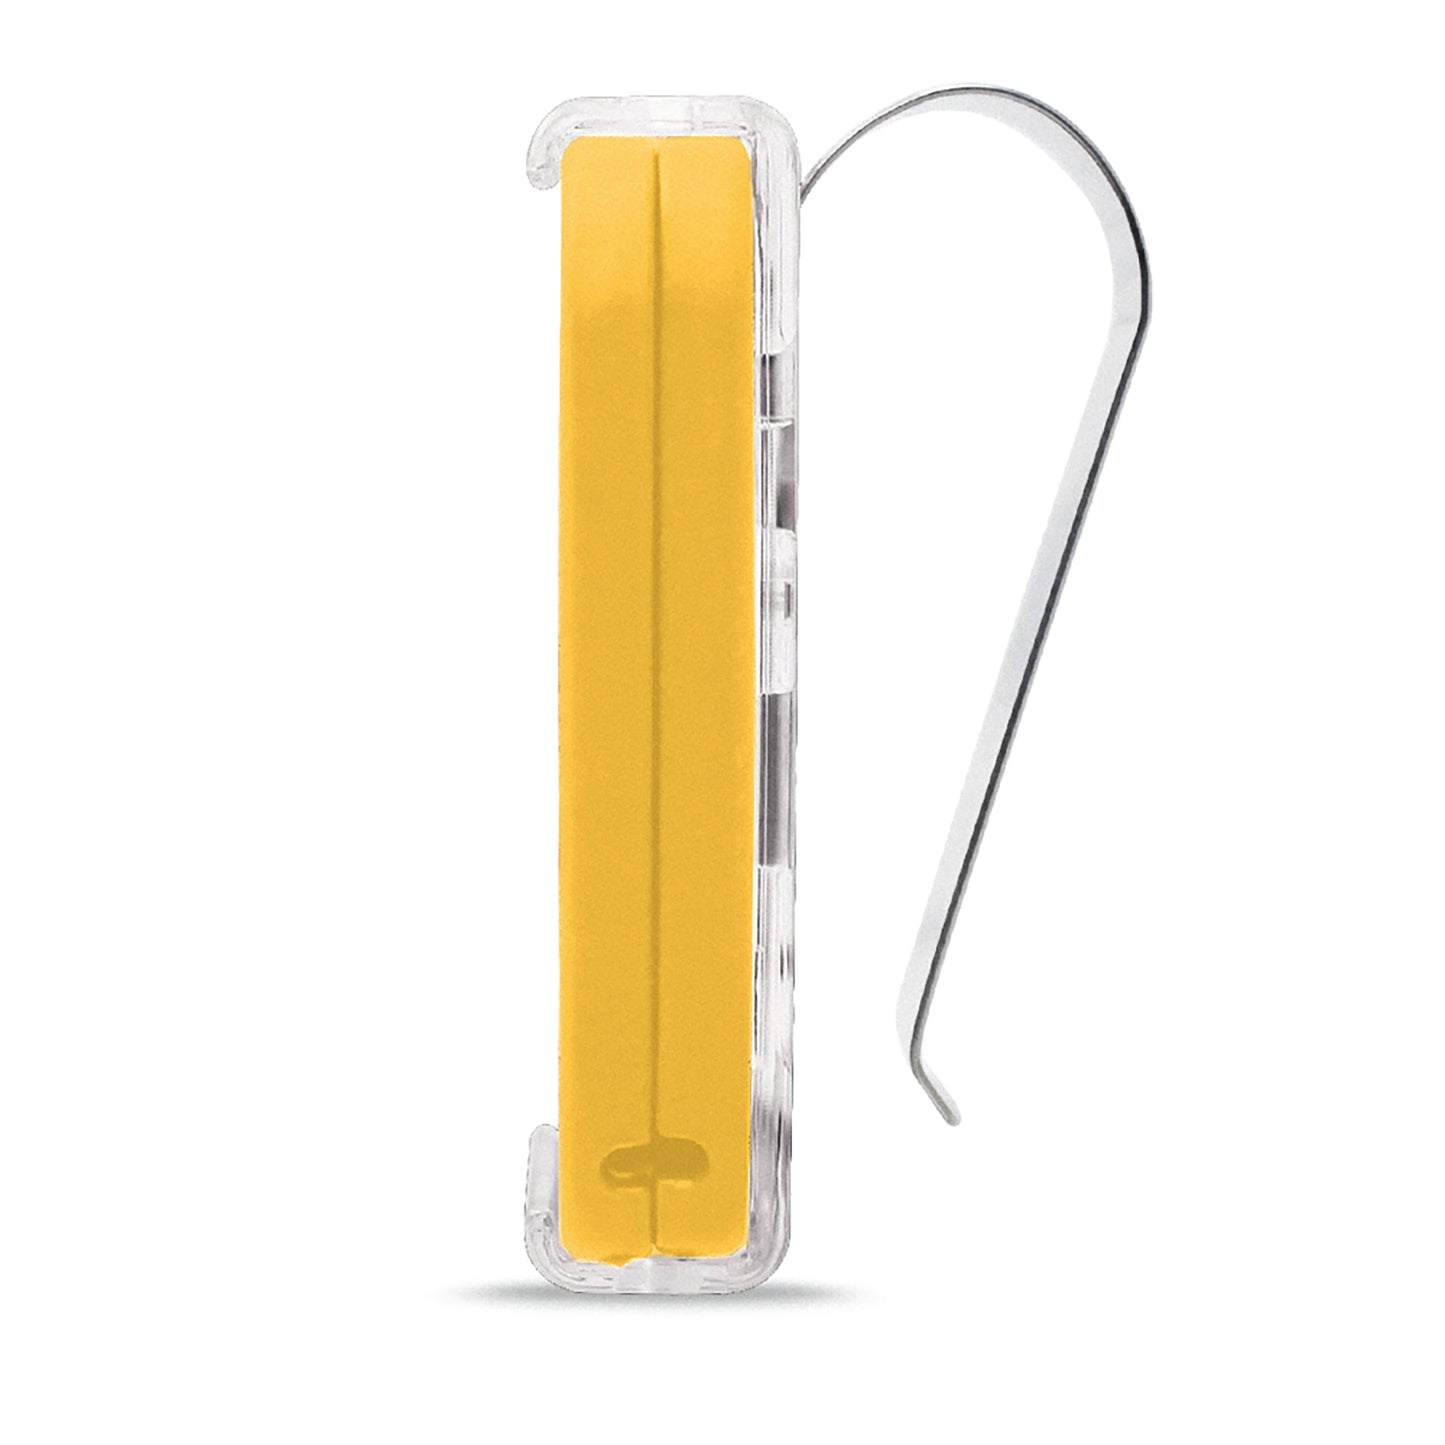 WHY EVO MINI Multi-frequency rolling code remote control from 280 to 868 MHz with Visor Clip, programmable self-learning gate opener, wide-range remote control with 4 buttons, pure yellow